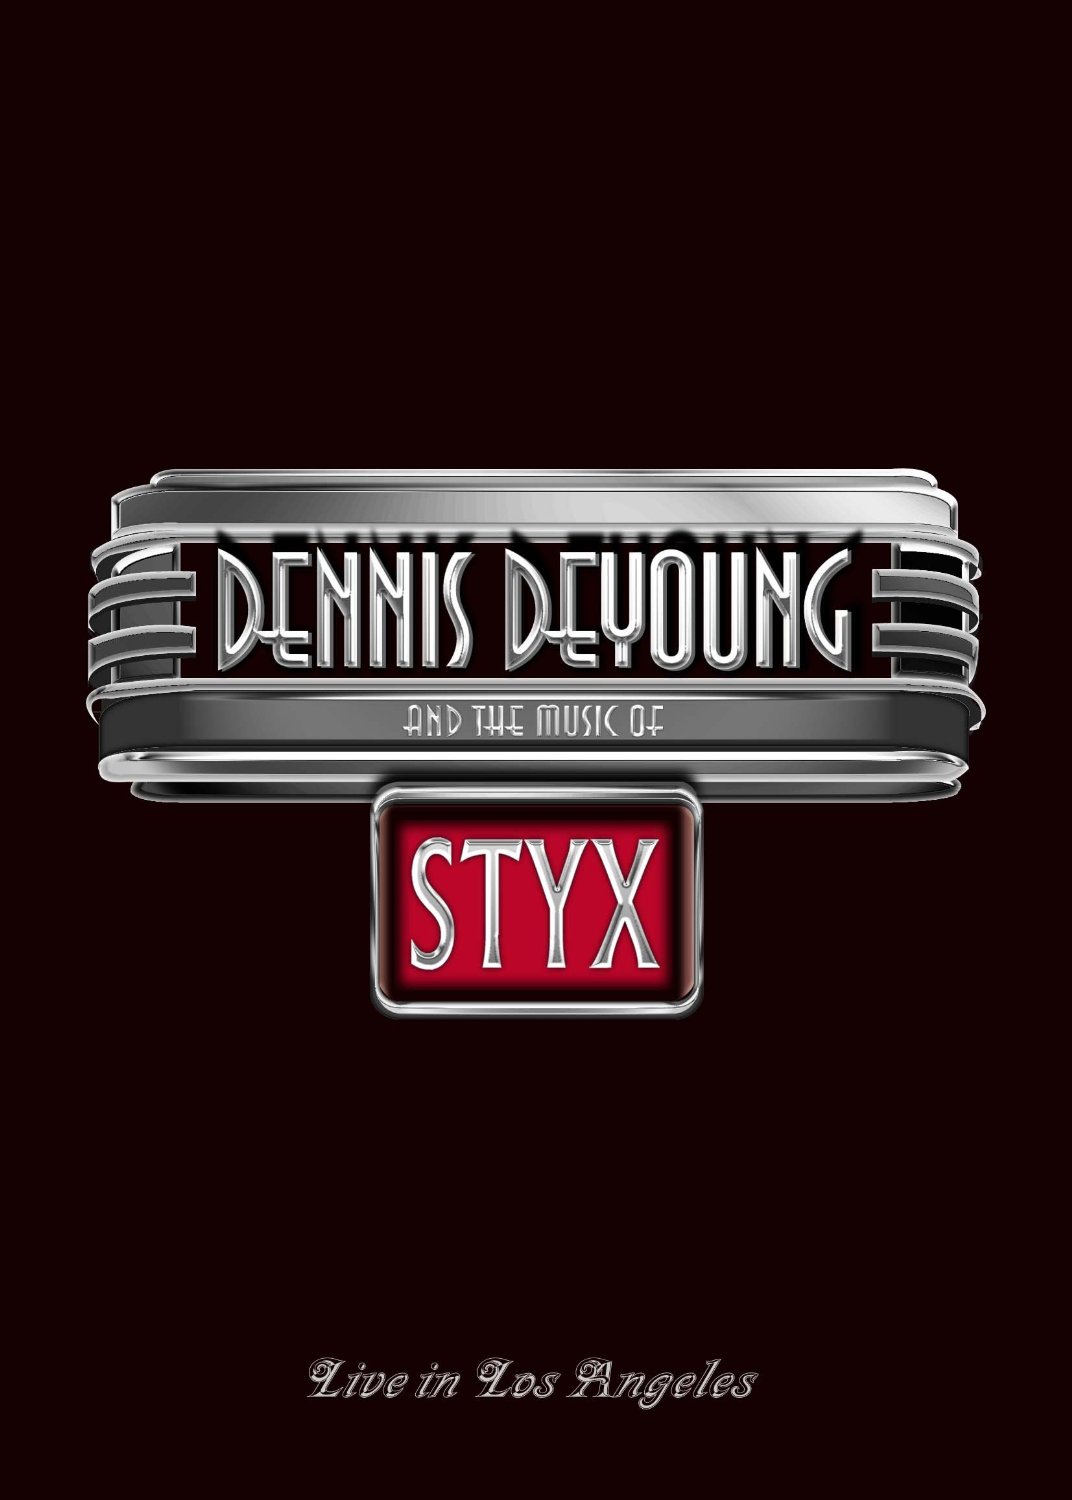 Dennis DeYoung and the Music of Styx - Live in Los Angeles (2014) Blu-ray 1080i AVC LPCM 2.0 + BDRip 1080p